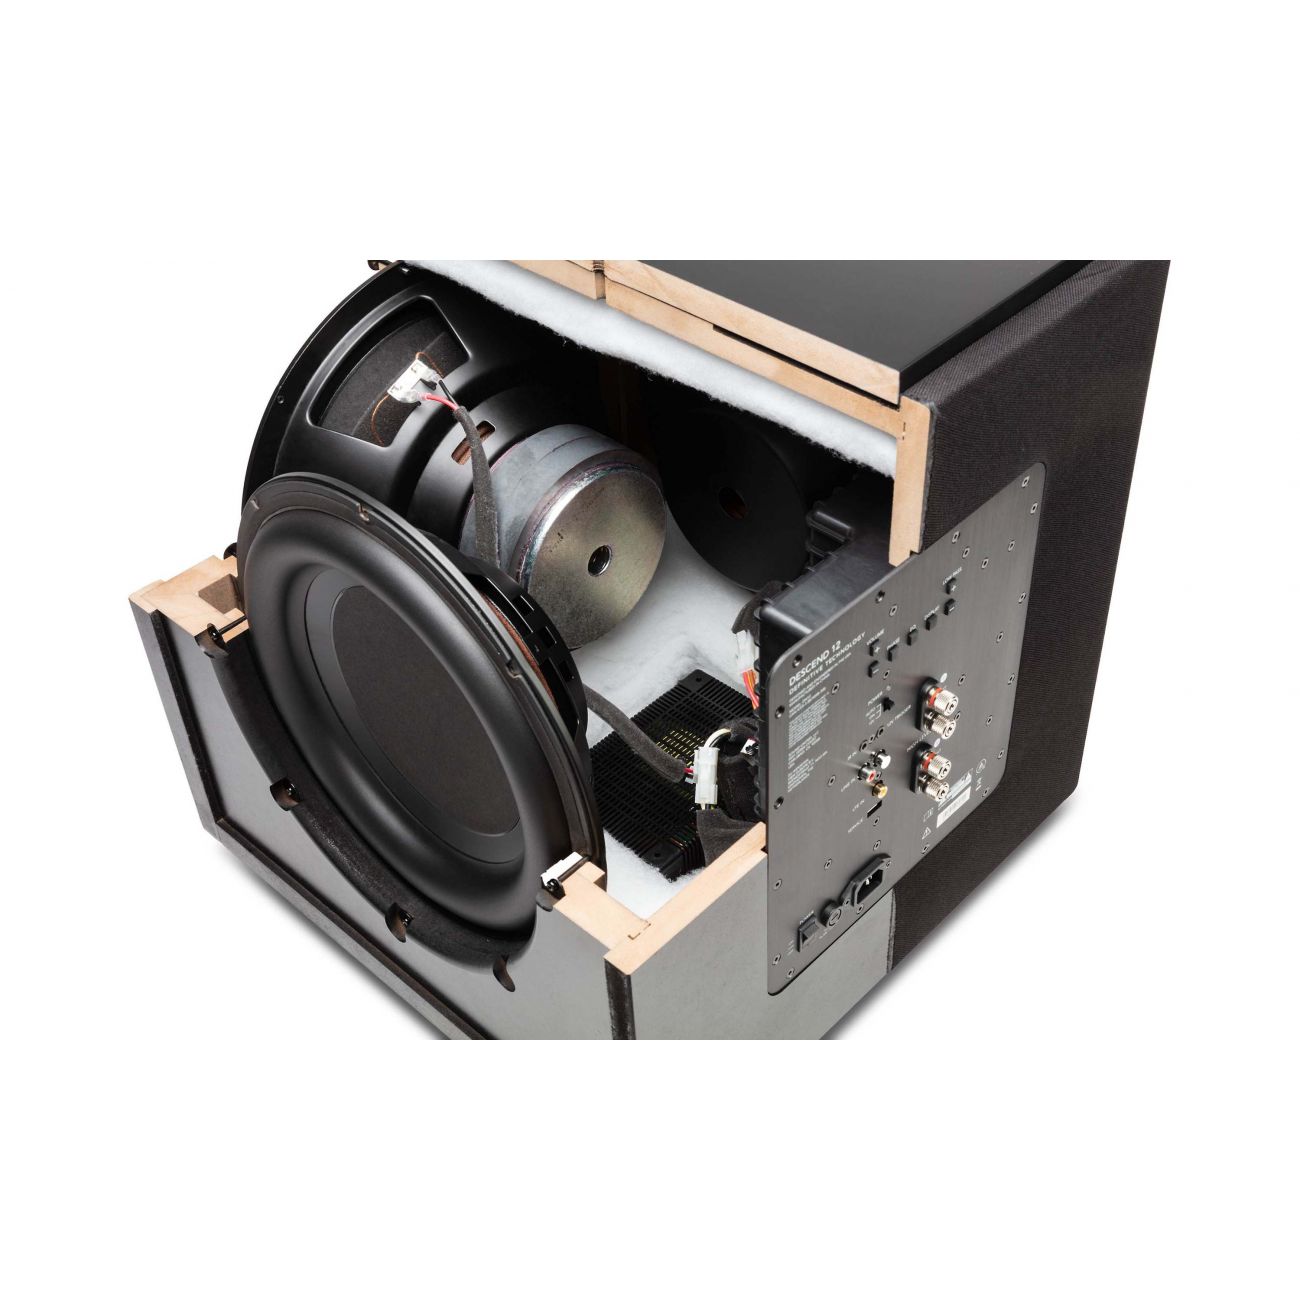 Definitive Technology DN15 15" 1500W Powered Subwoofer - Masters Voice Audio Visual